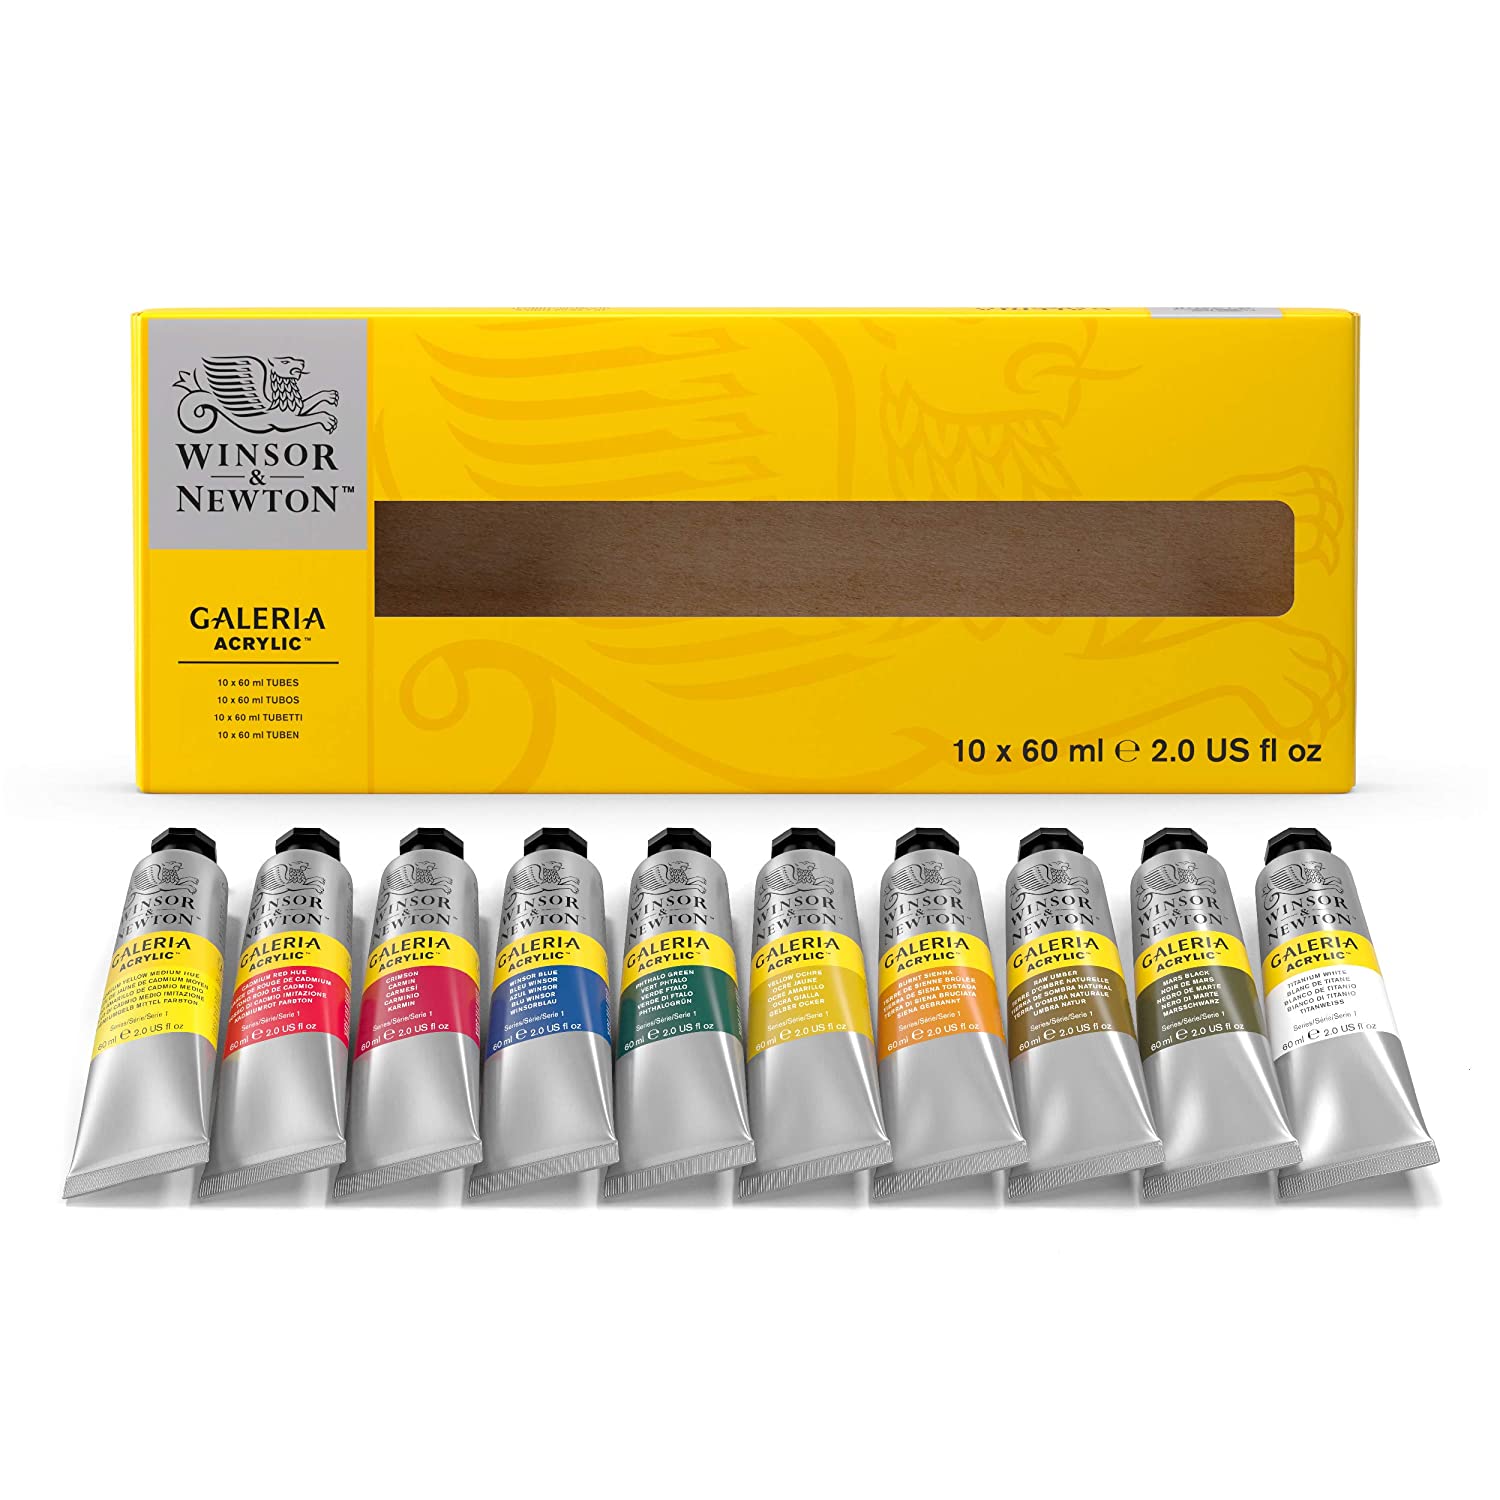 Winsor & Newton acrylic paint for painting on polymer clay, Amazon